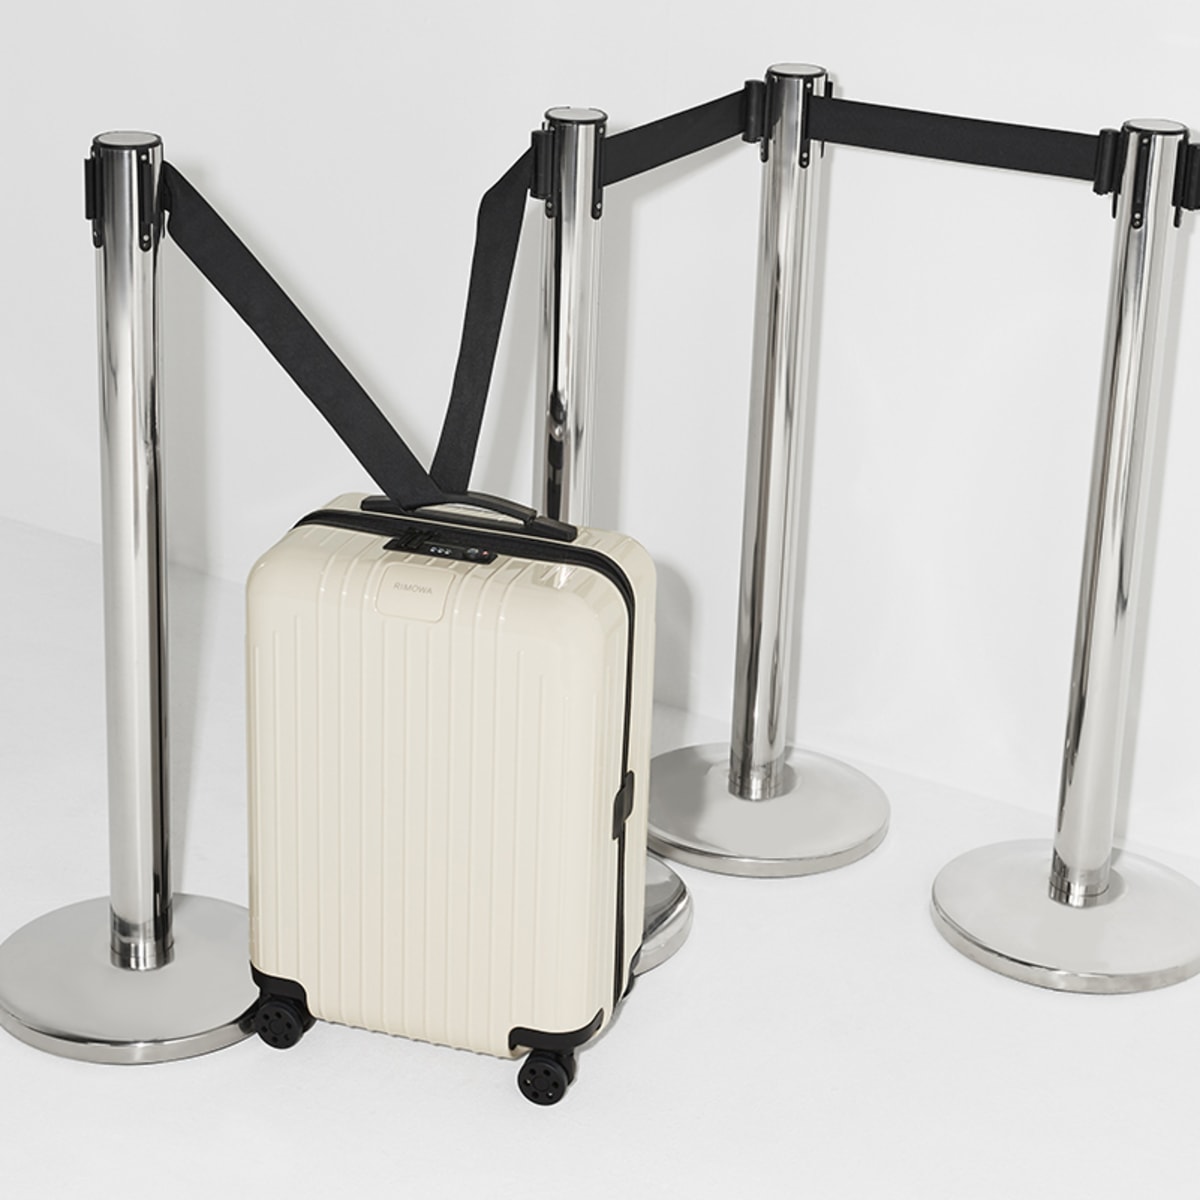 RIMOWA Enters Minimal Mode With New Ivory Beige Colorway - Airows